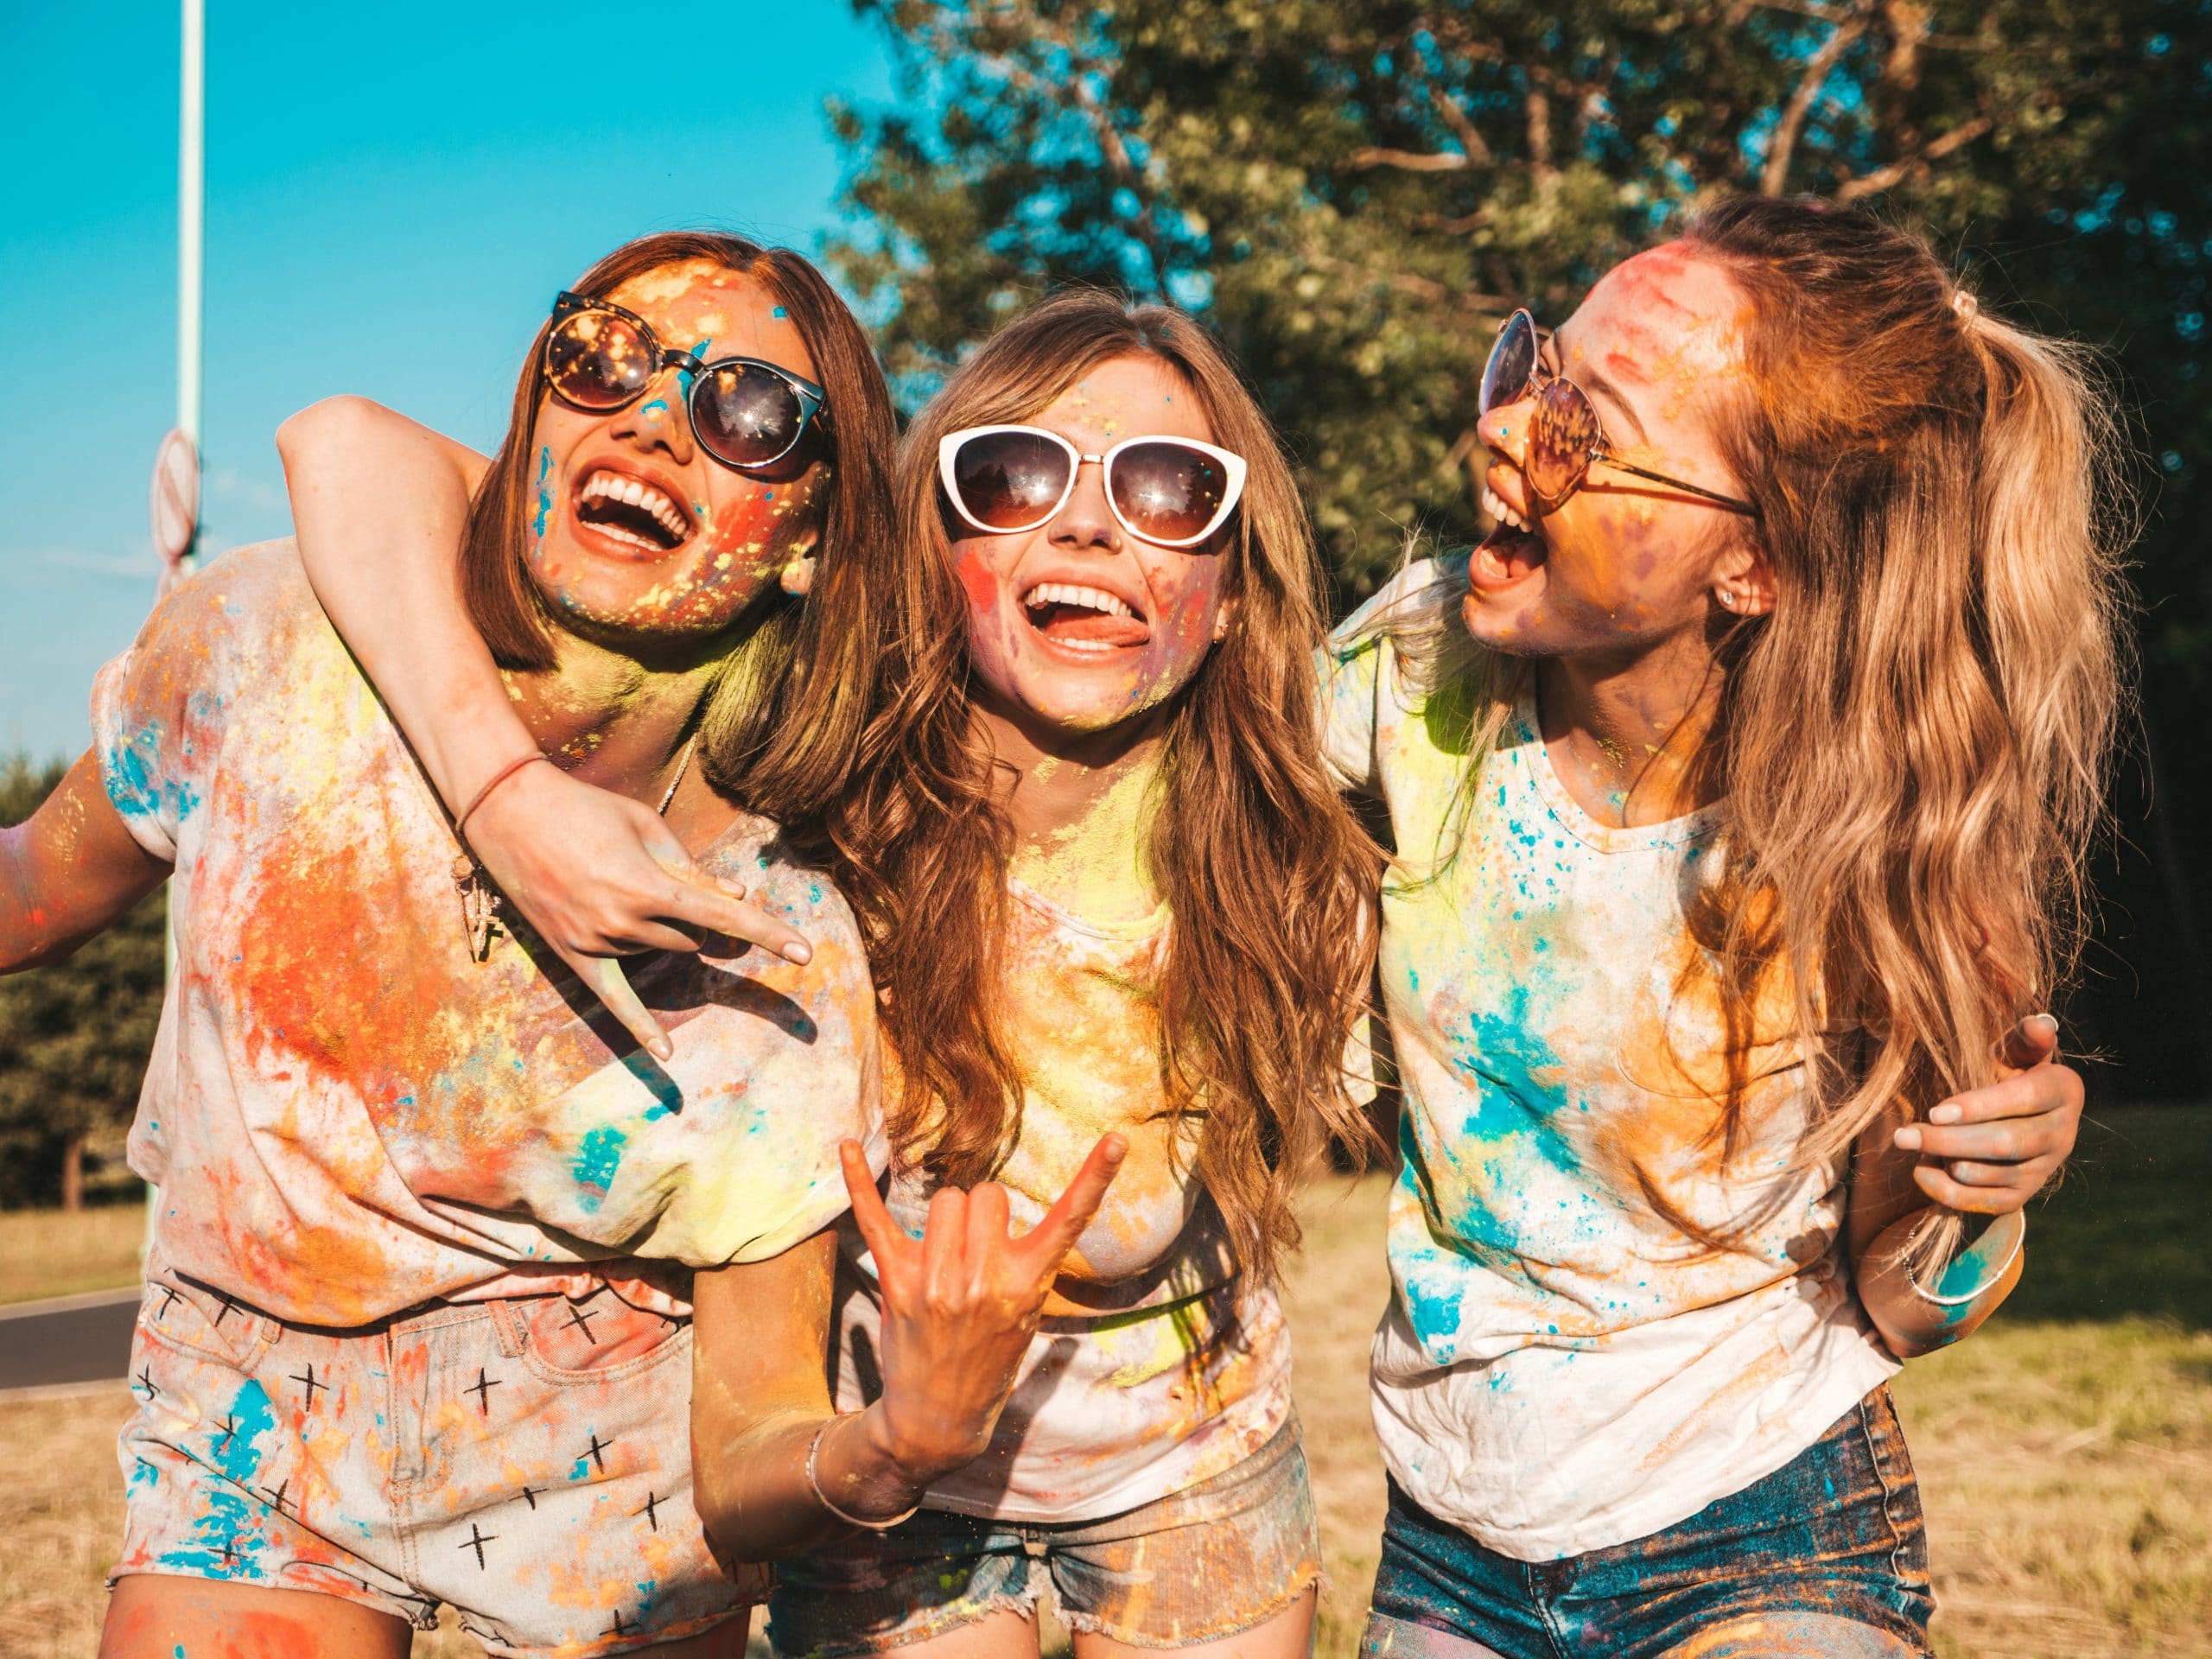 Three happy beautiful girls making party at Holi colors festival in summer time.Young smiling women friends having fun after music event at sunset. Positive models going crazy in sunglasses at sunset